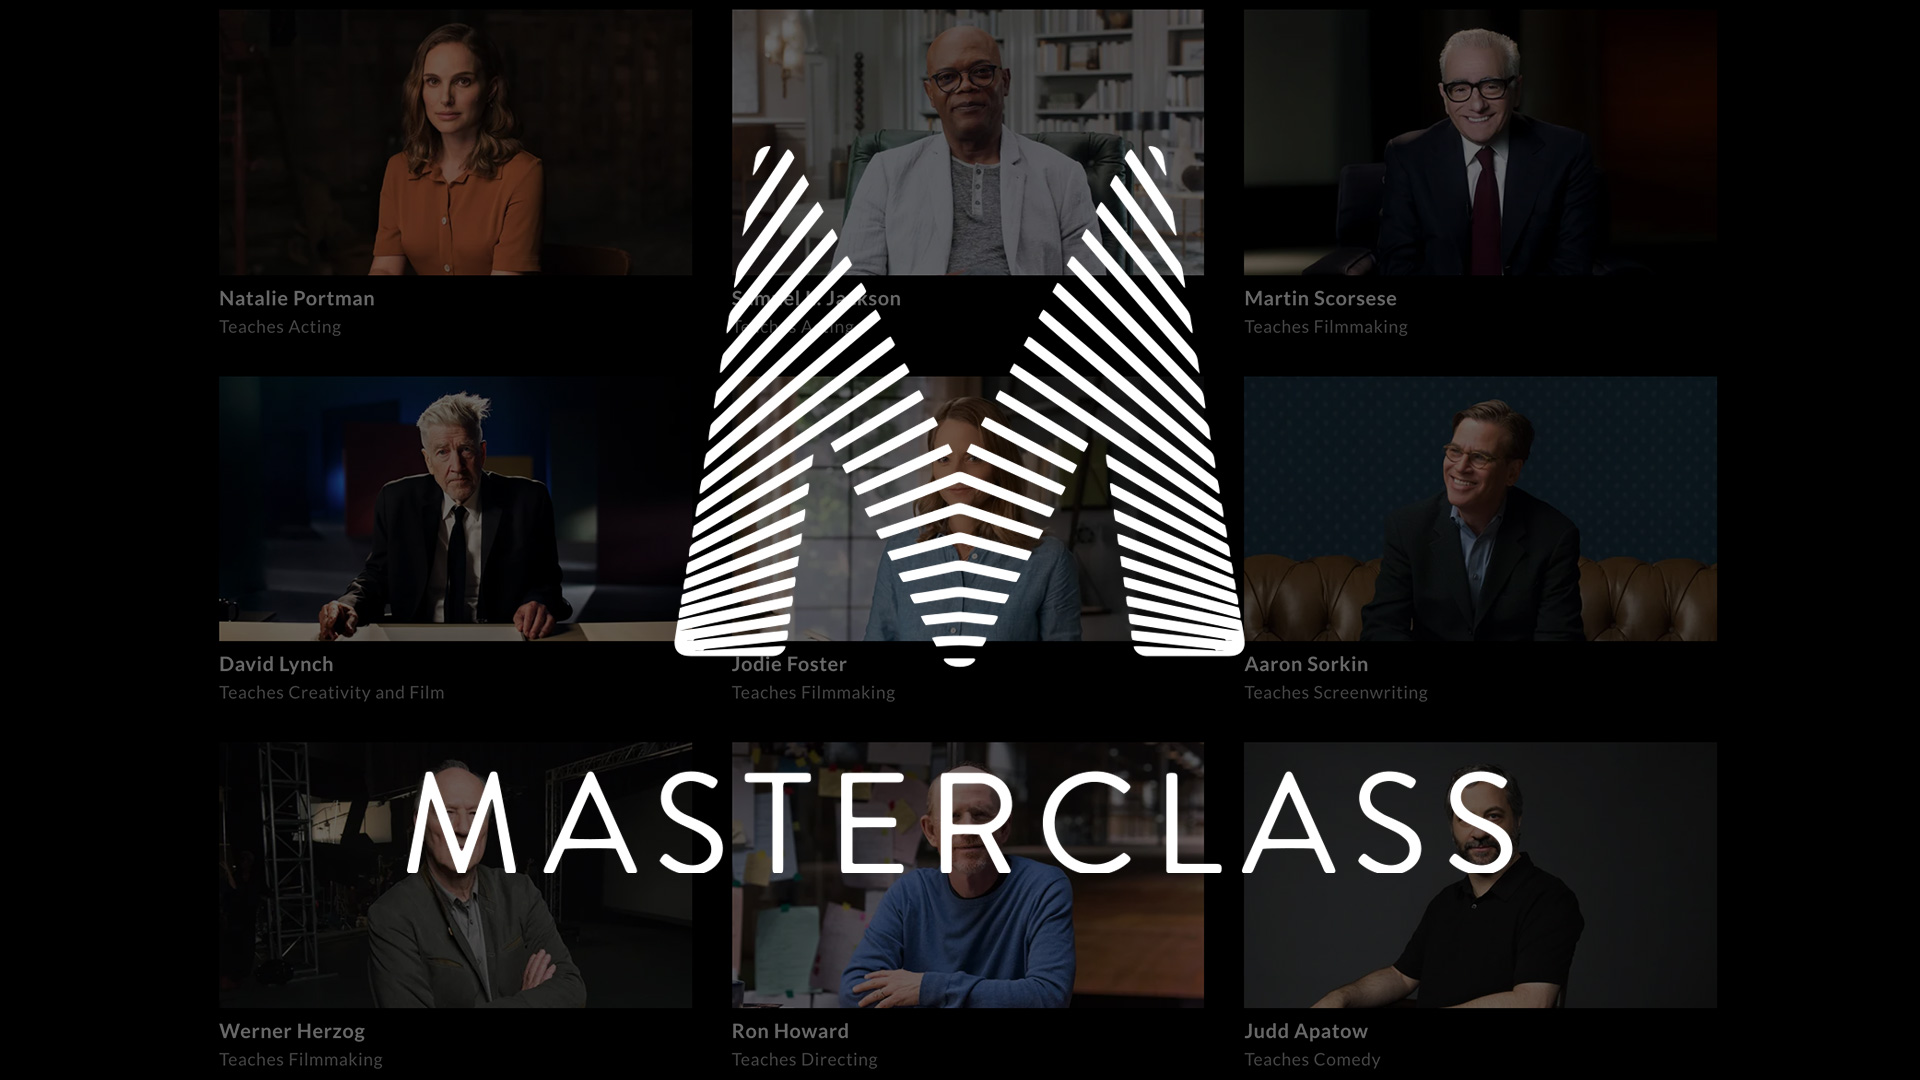 MasterClass Buy One, Share One Free Offer on Annual Membership